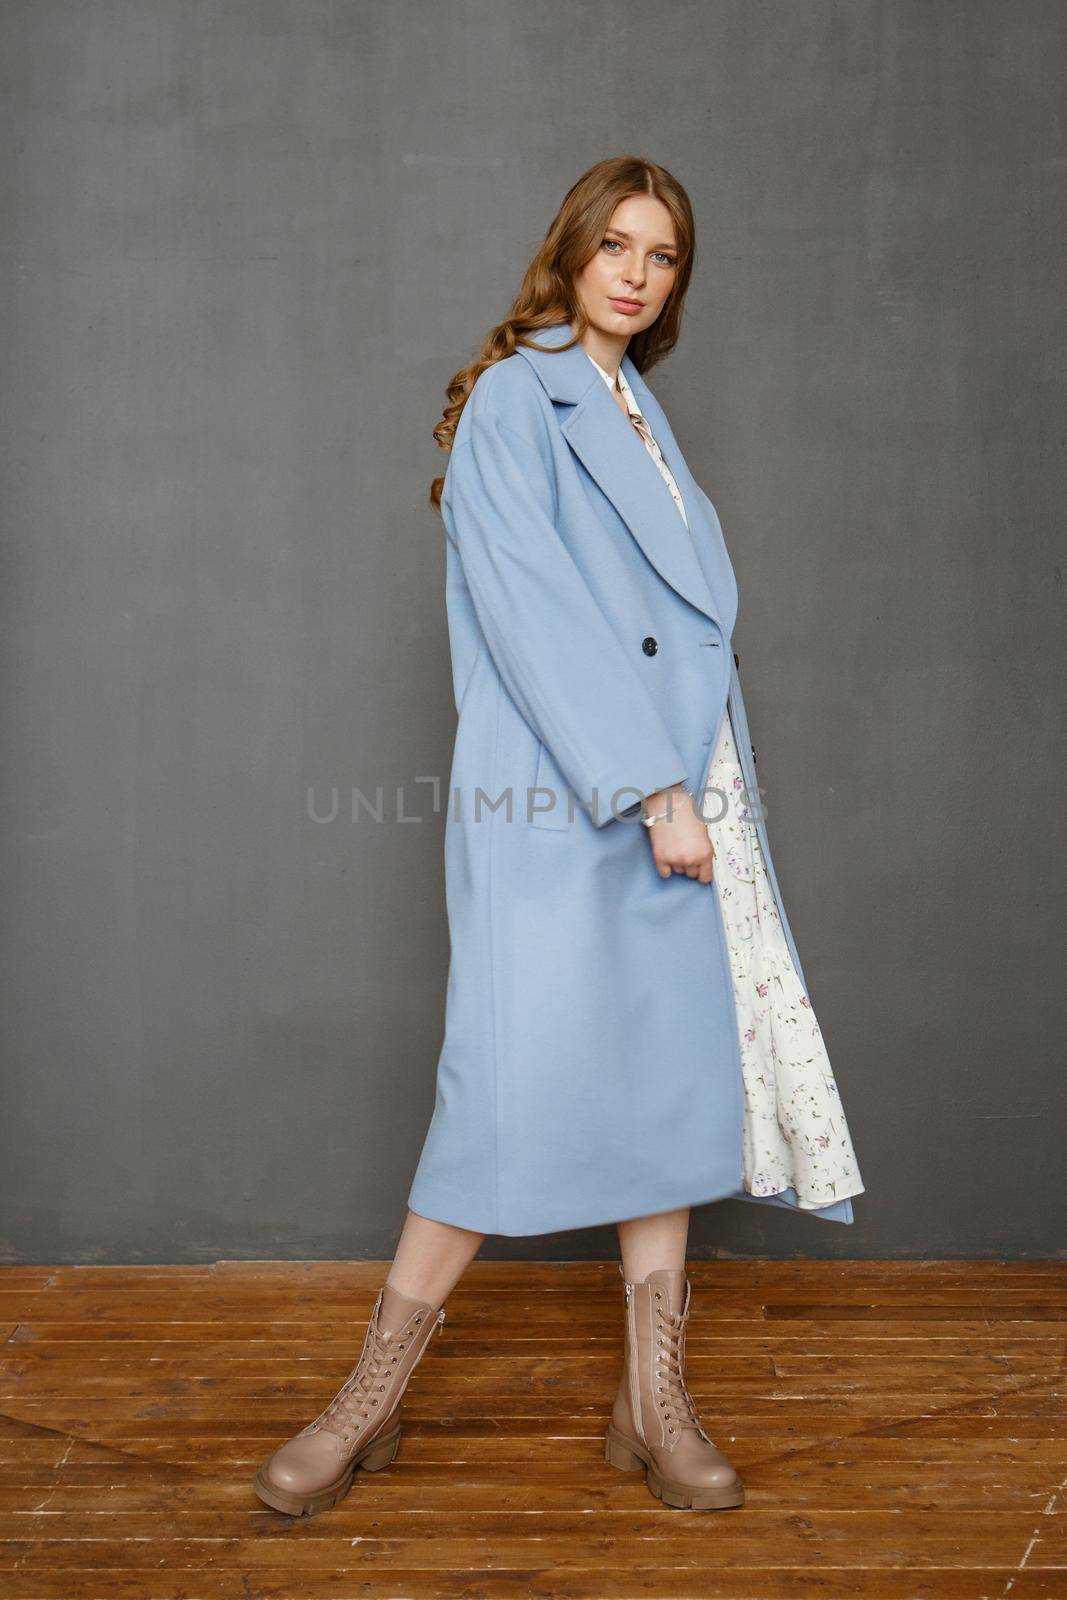 Beautiful brunette woman in a blue coat and nice top. Fashion spring autumn winter photo by deandy